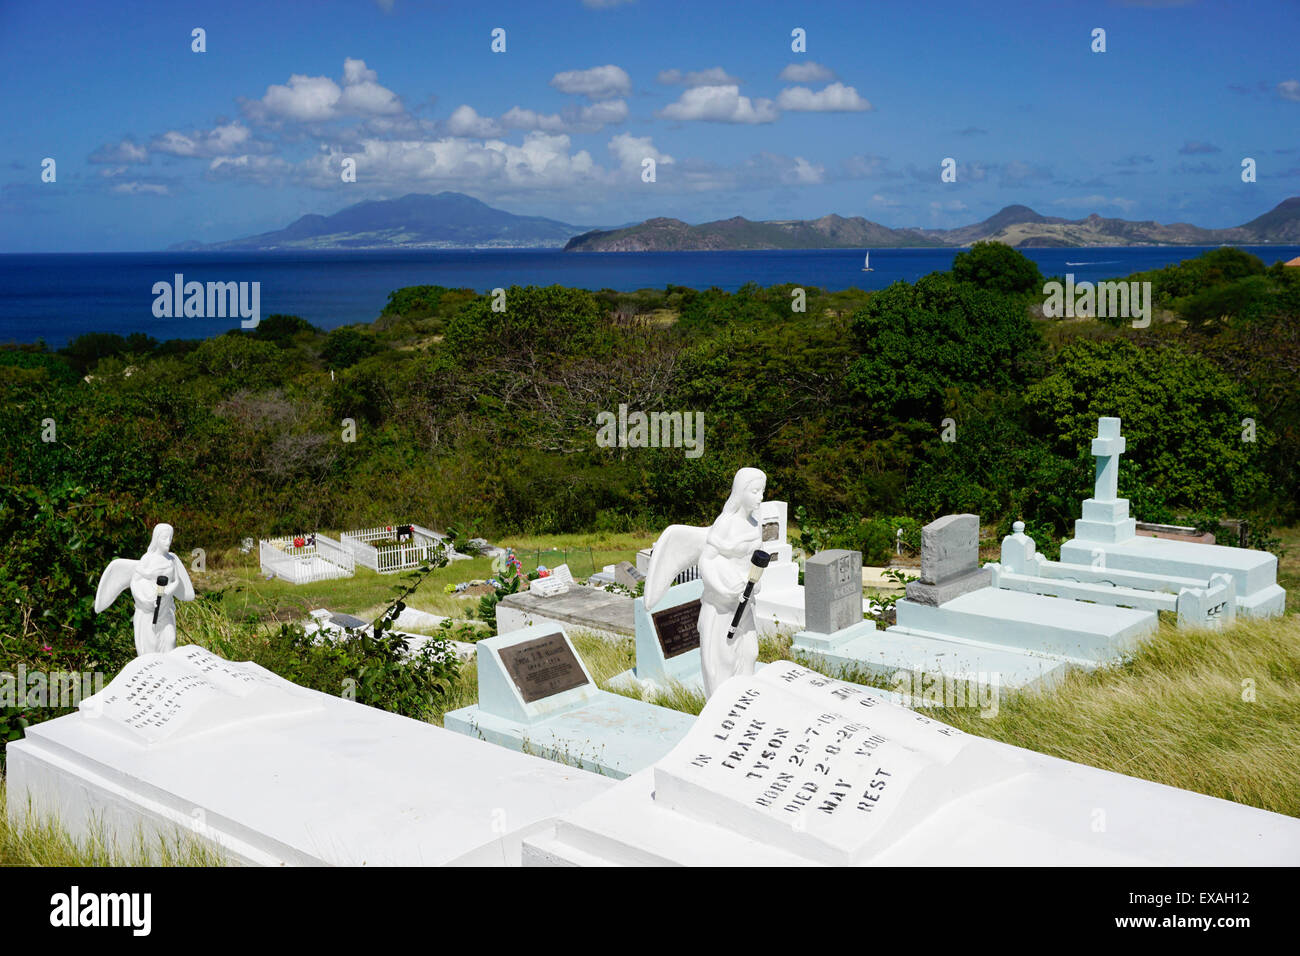 Graveyard at S. Thomas Anglican Church built in 1643, Nevis, St. Kitts and Nevis, Leeward Islands, West Indies, Caribbean Stock Photo